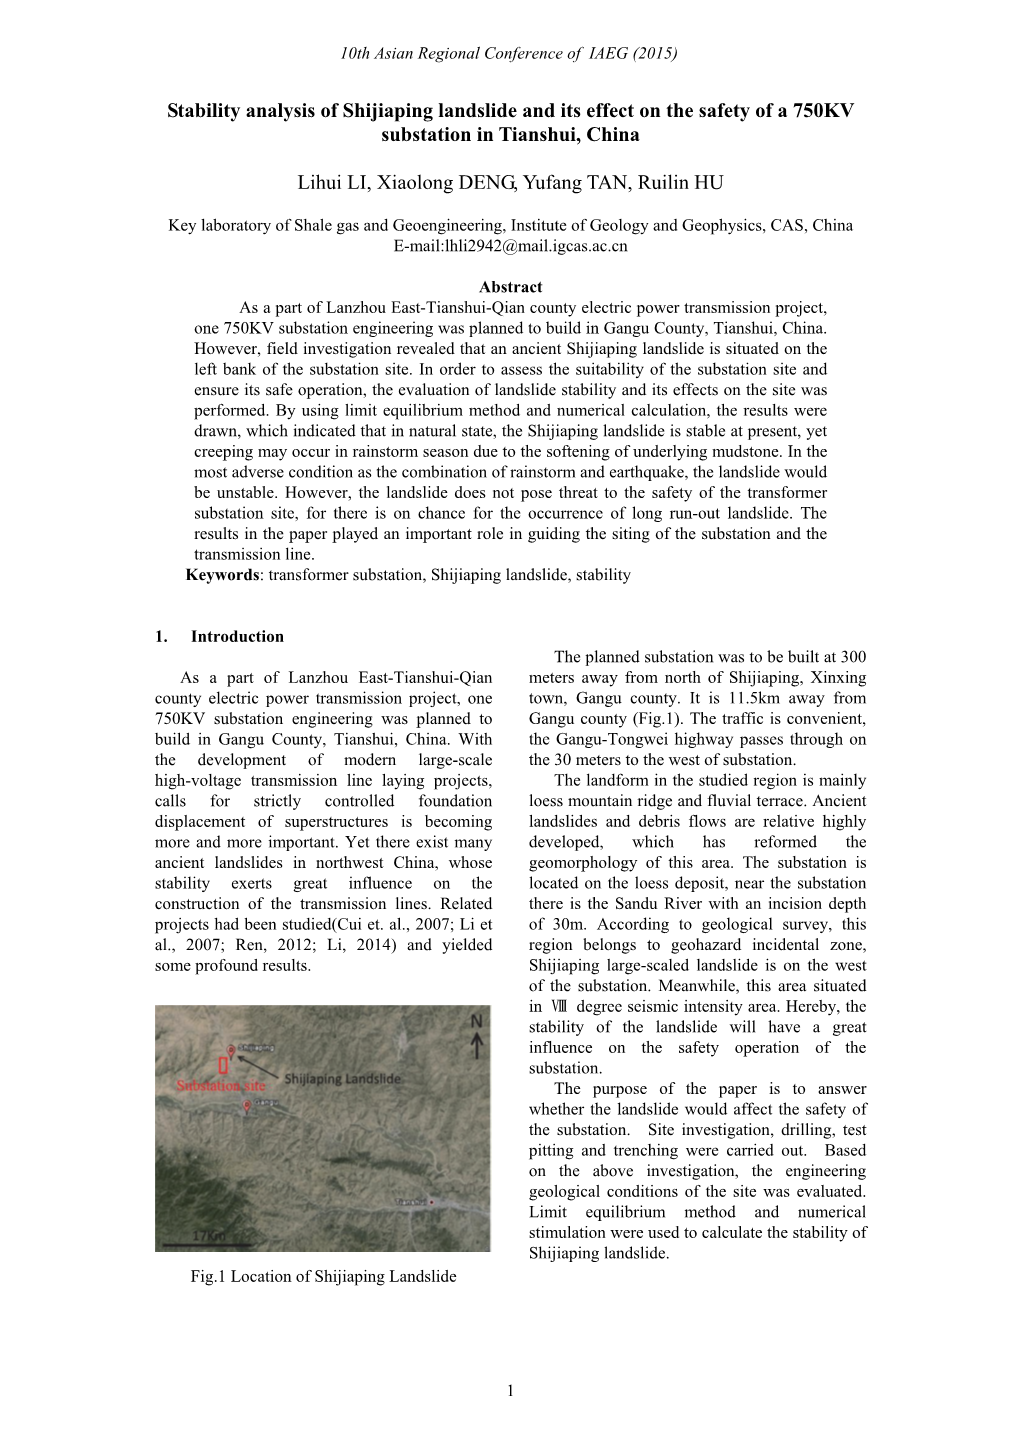 Stability Analysis of Shijiaping Landslide and Its Effect on the Safety of a 750KV Substation in Tianshui, China